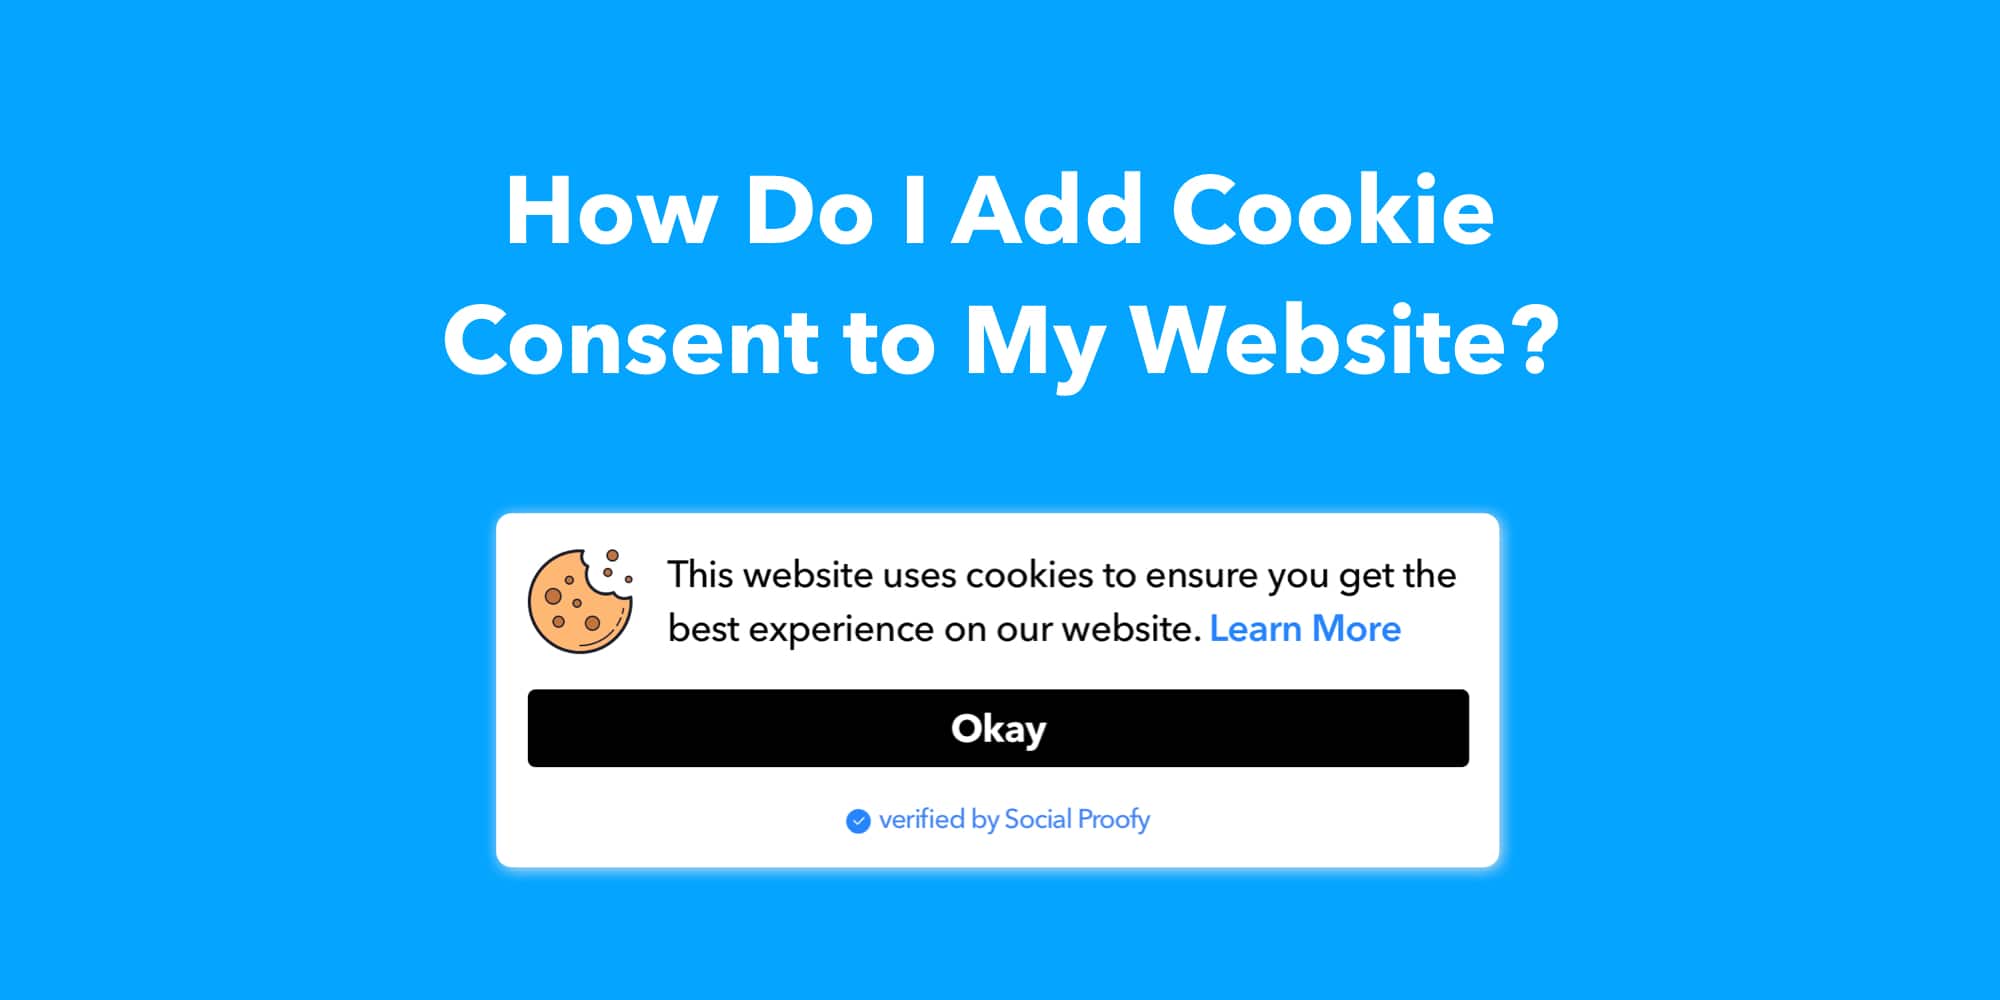 How Do I Add Cookie Consent to My Website?